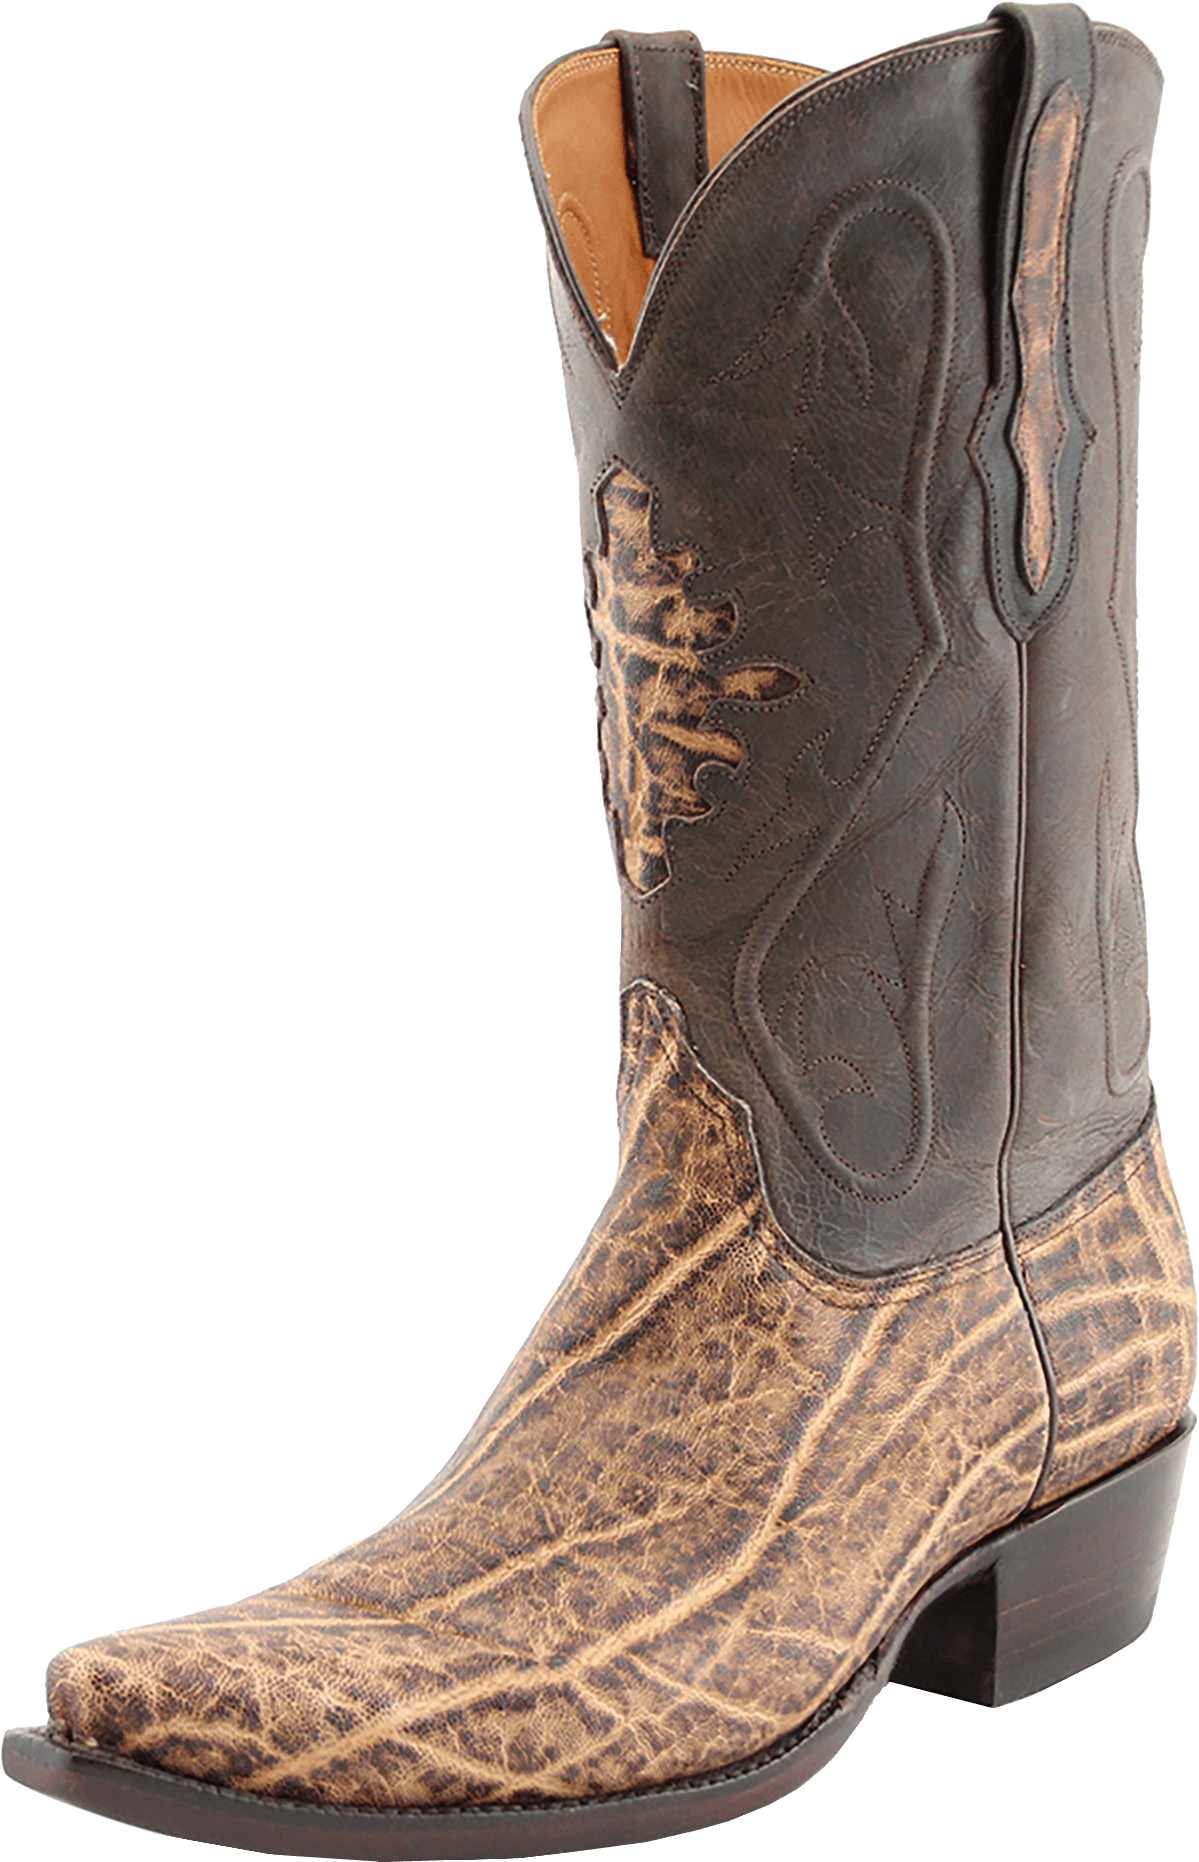 Boots Png 1199 X 1862